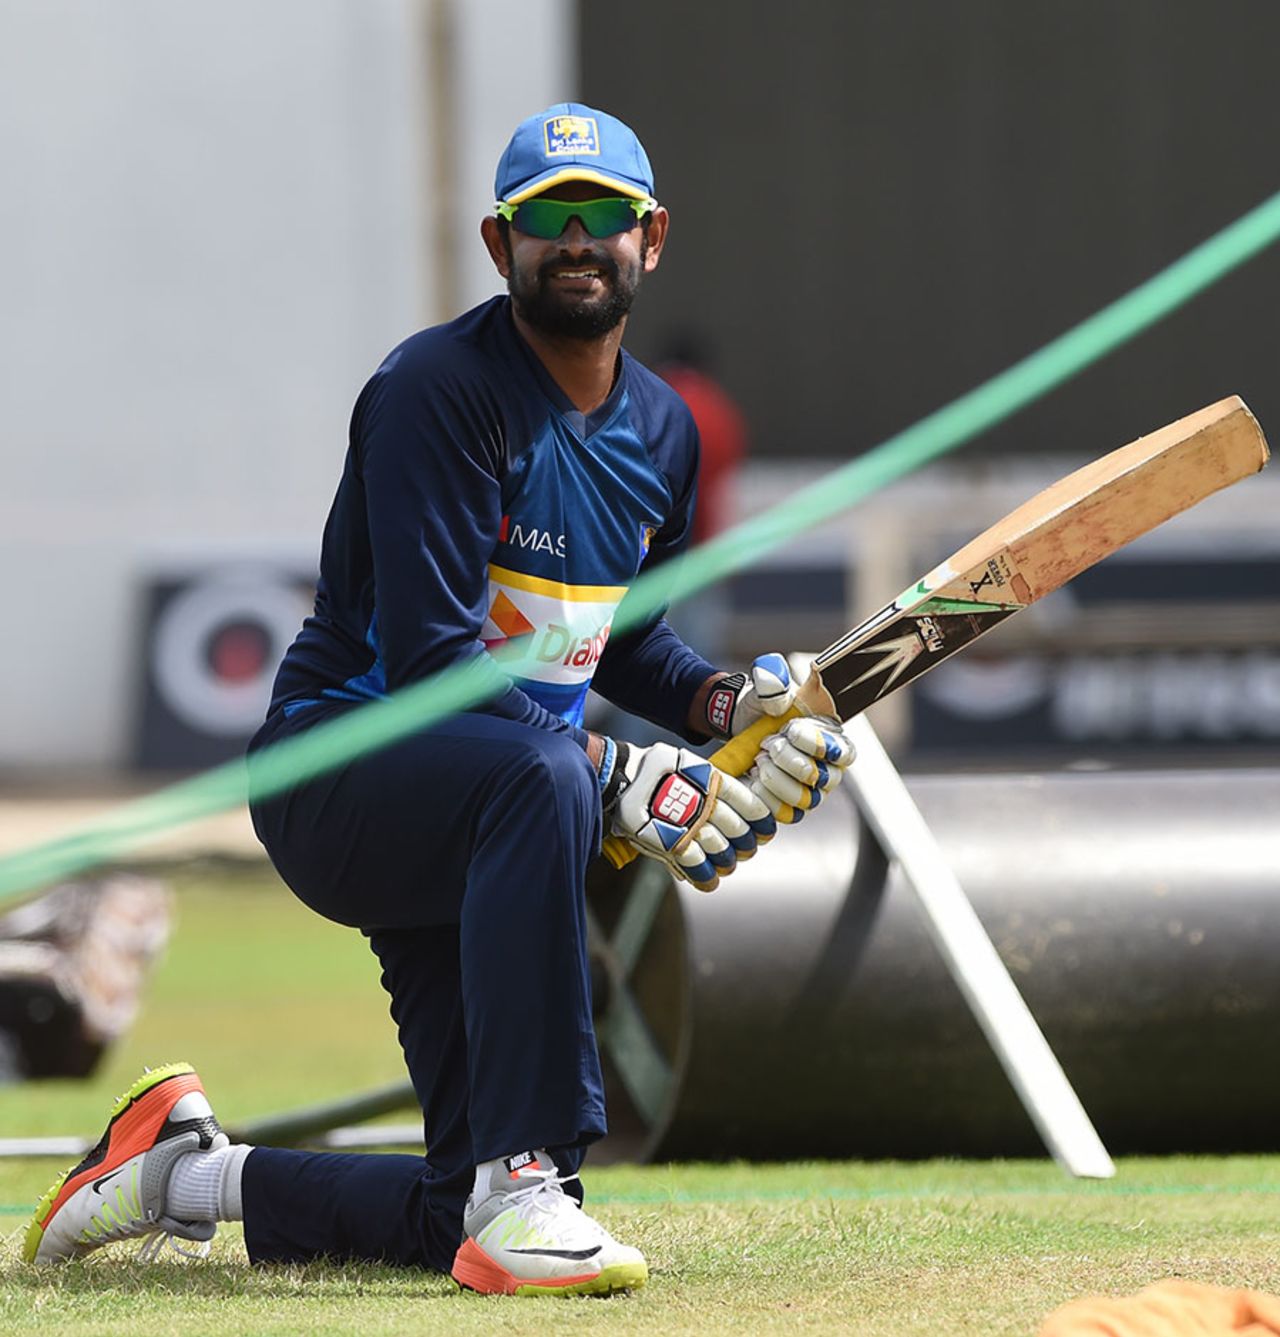 Lahiru Thirimanne trains on the eve of the SSC Test, having made a return to the Test squad, Colombo, August 2, 2017